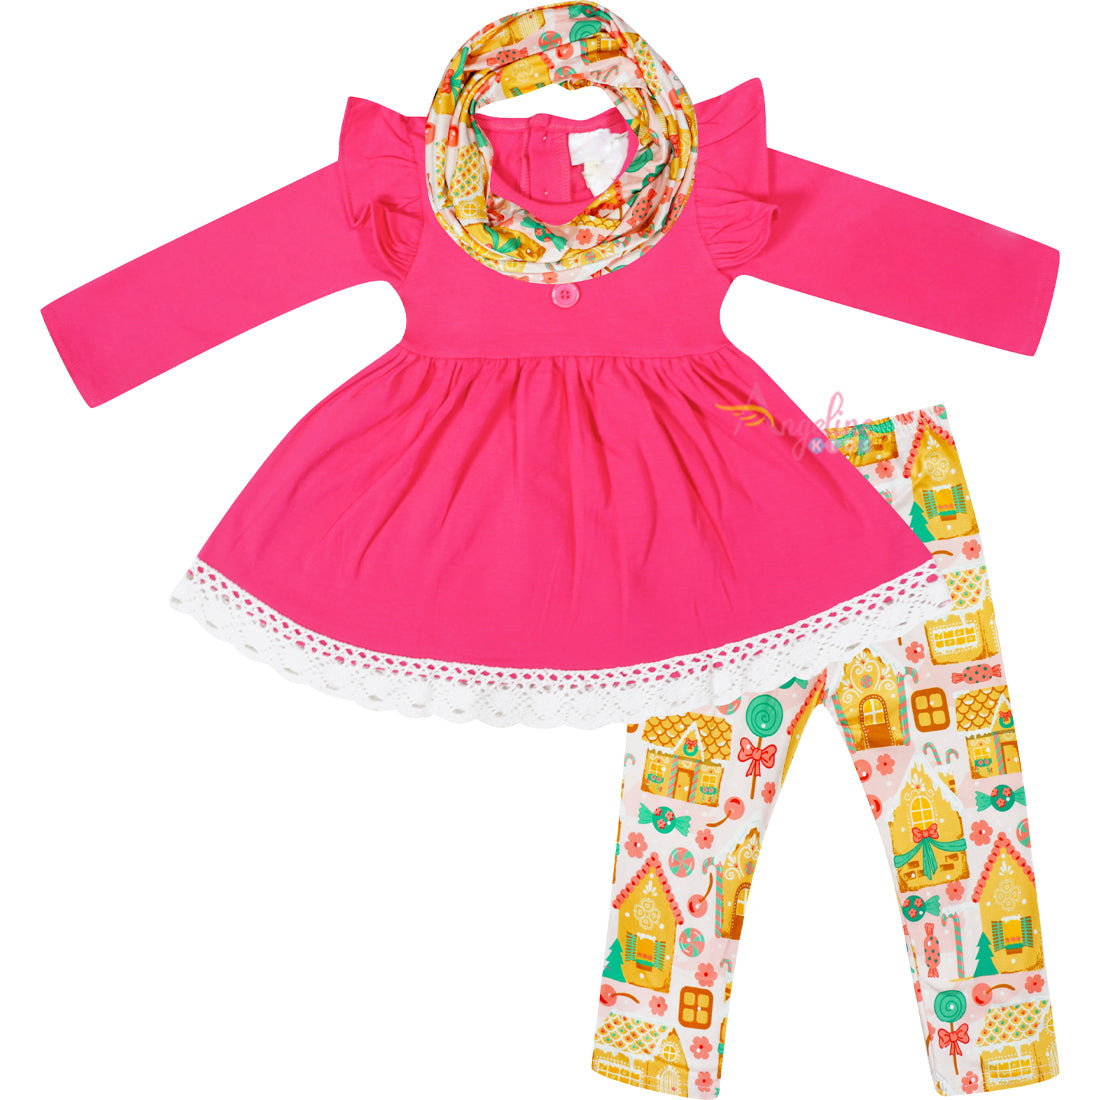 Girls Christmas Gingerbread House Top Leggings Scarf Outfit - Angeline Kids